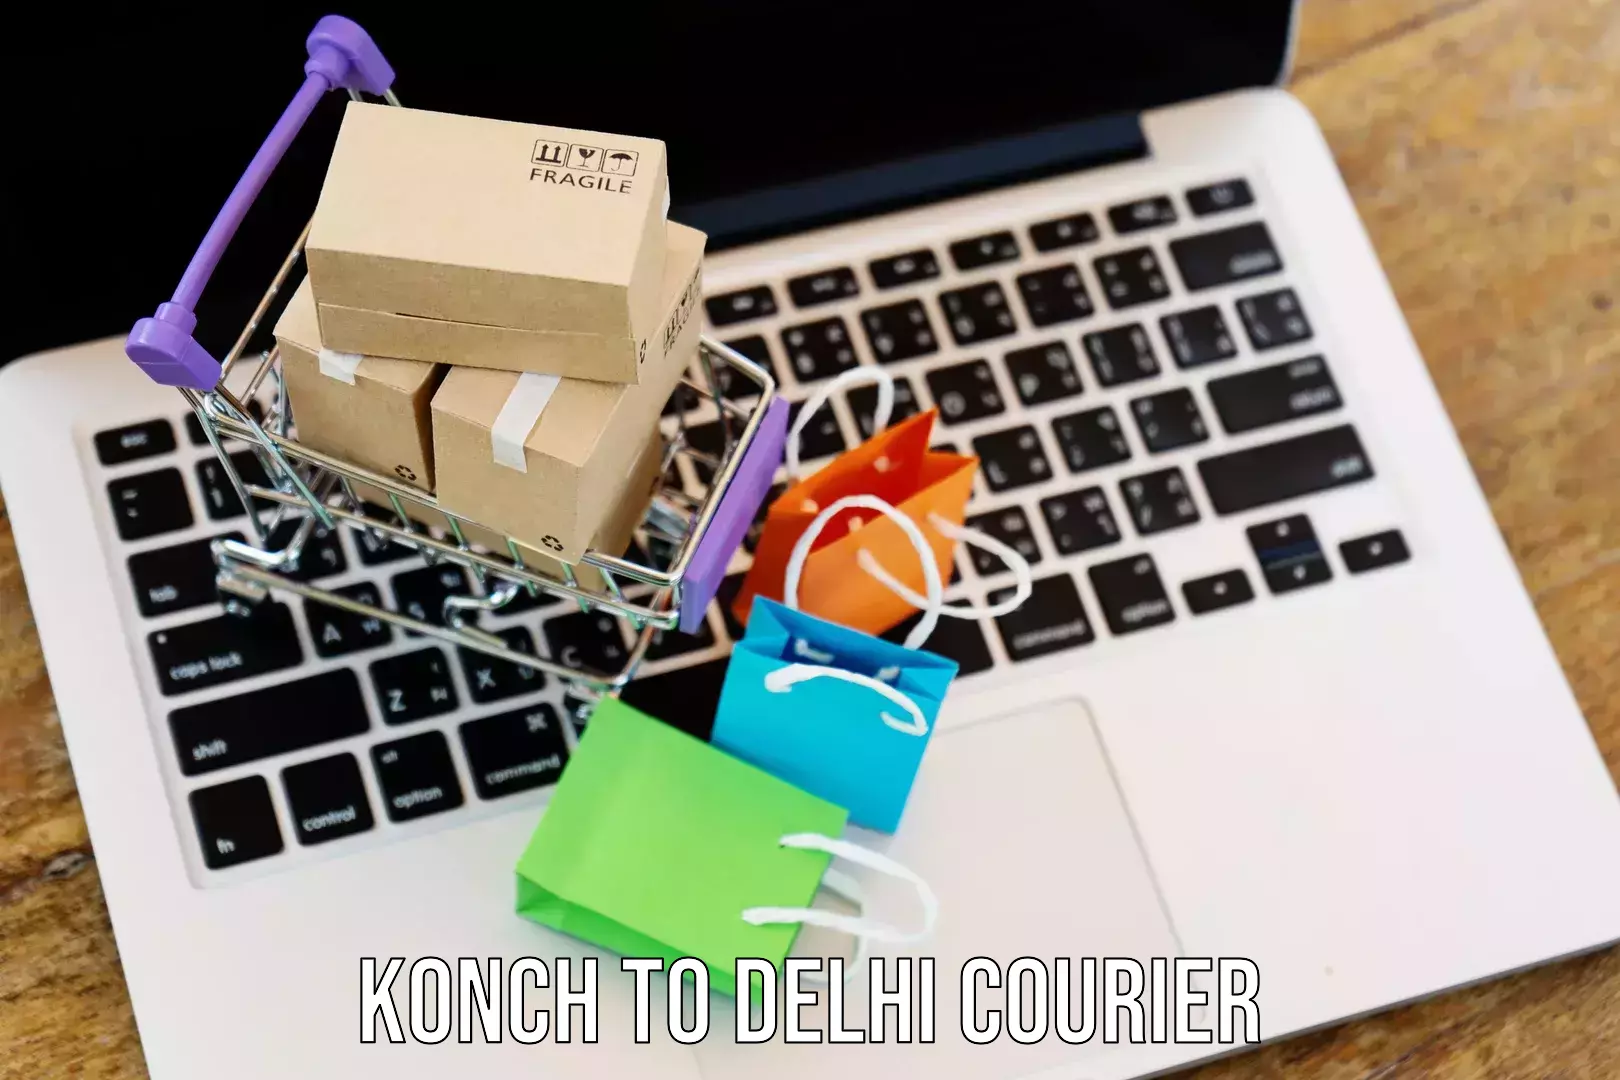 Enhanced tracking features in Konch to Delhi